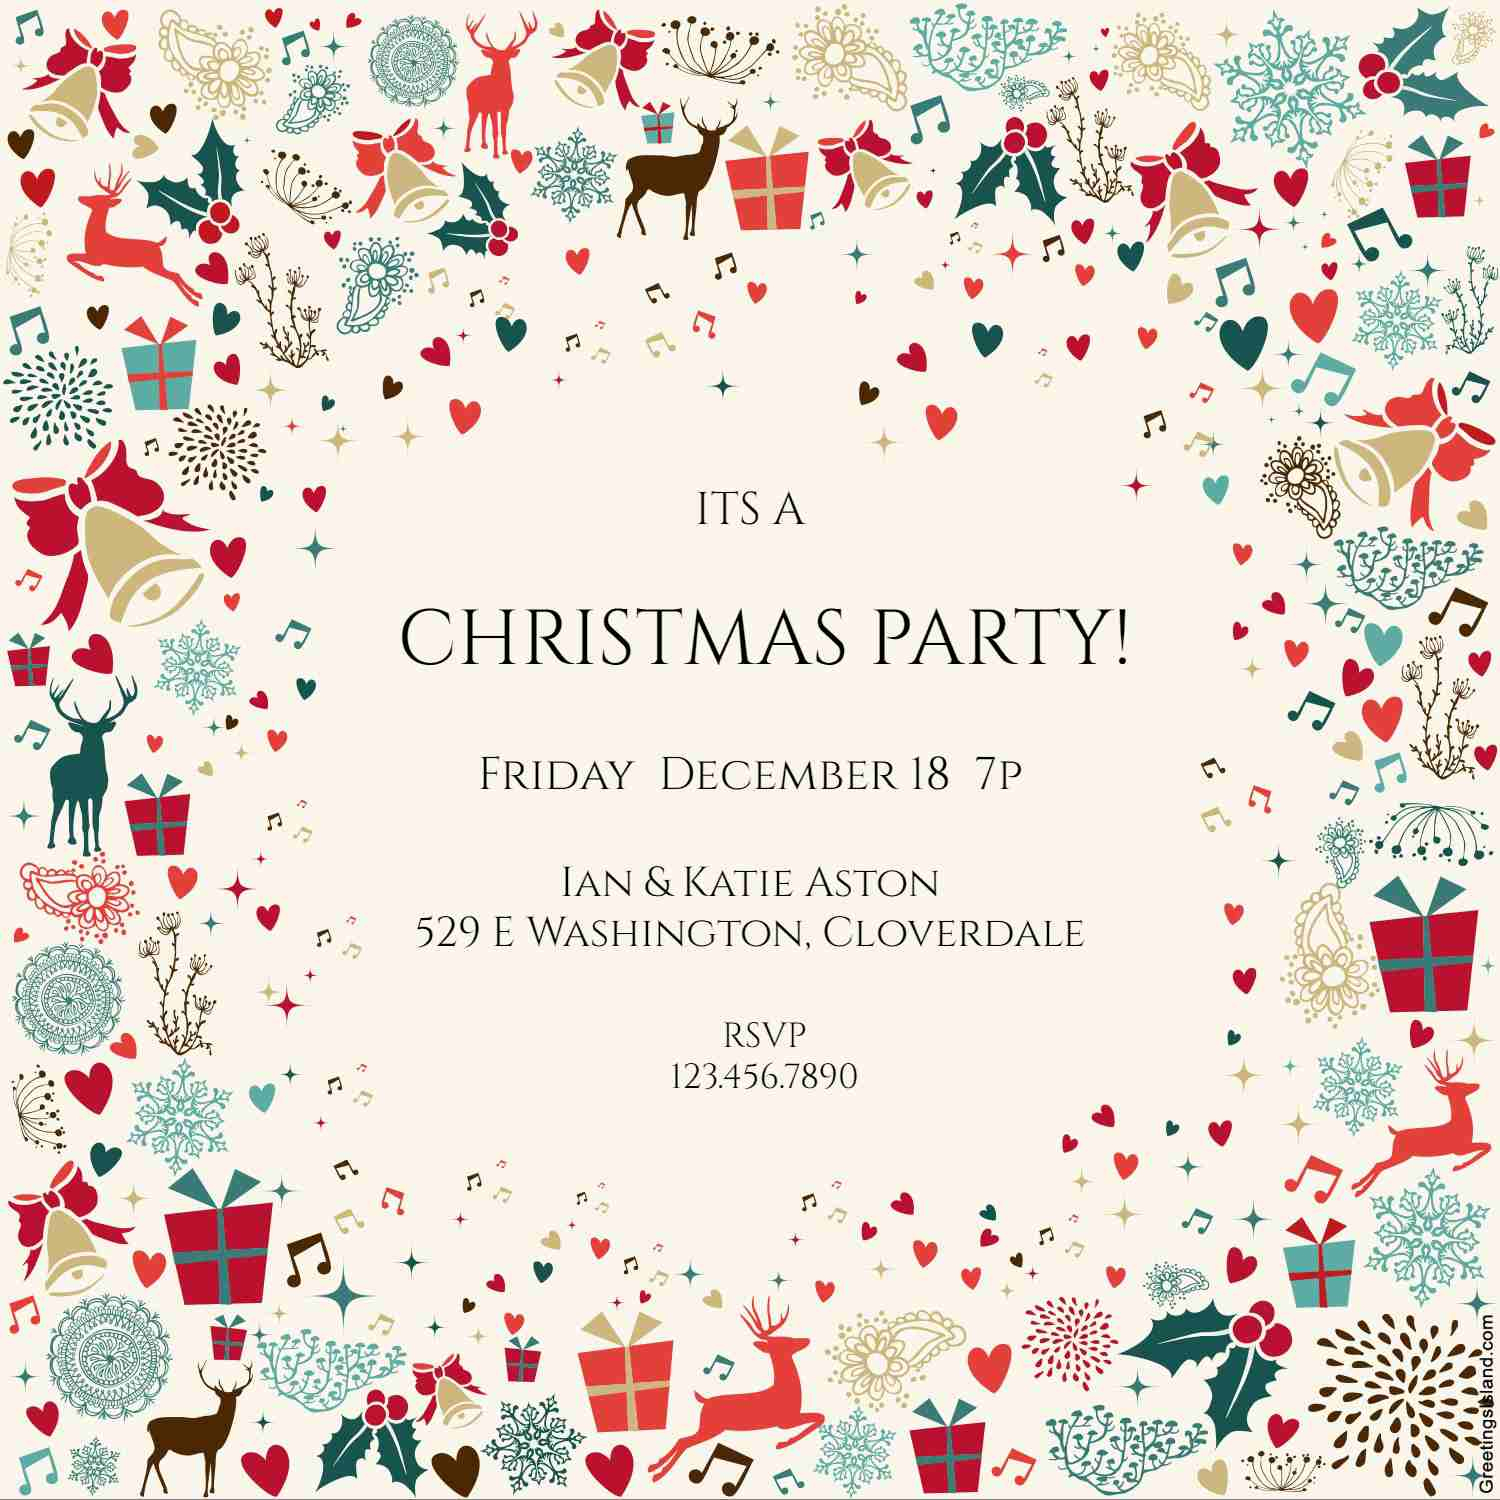 10 Free Christmas Party Invitations That You Can Print - Free Printable Christmas Invitations